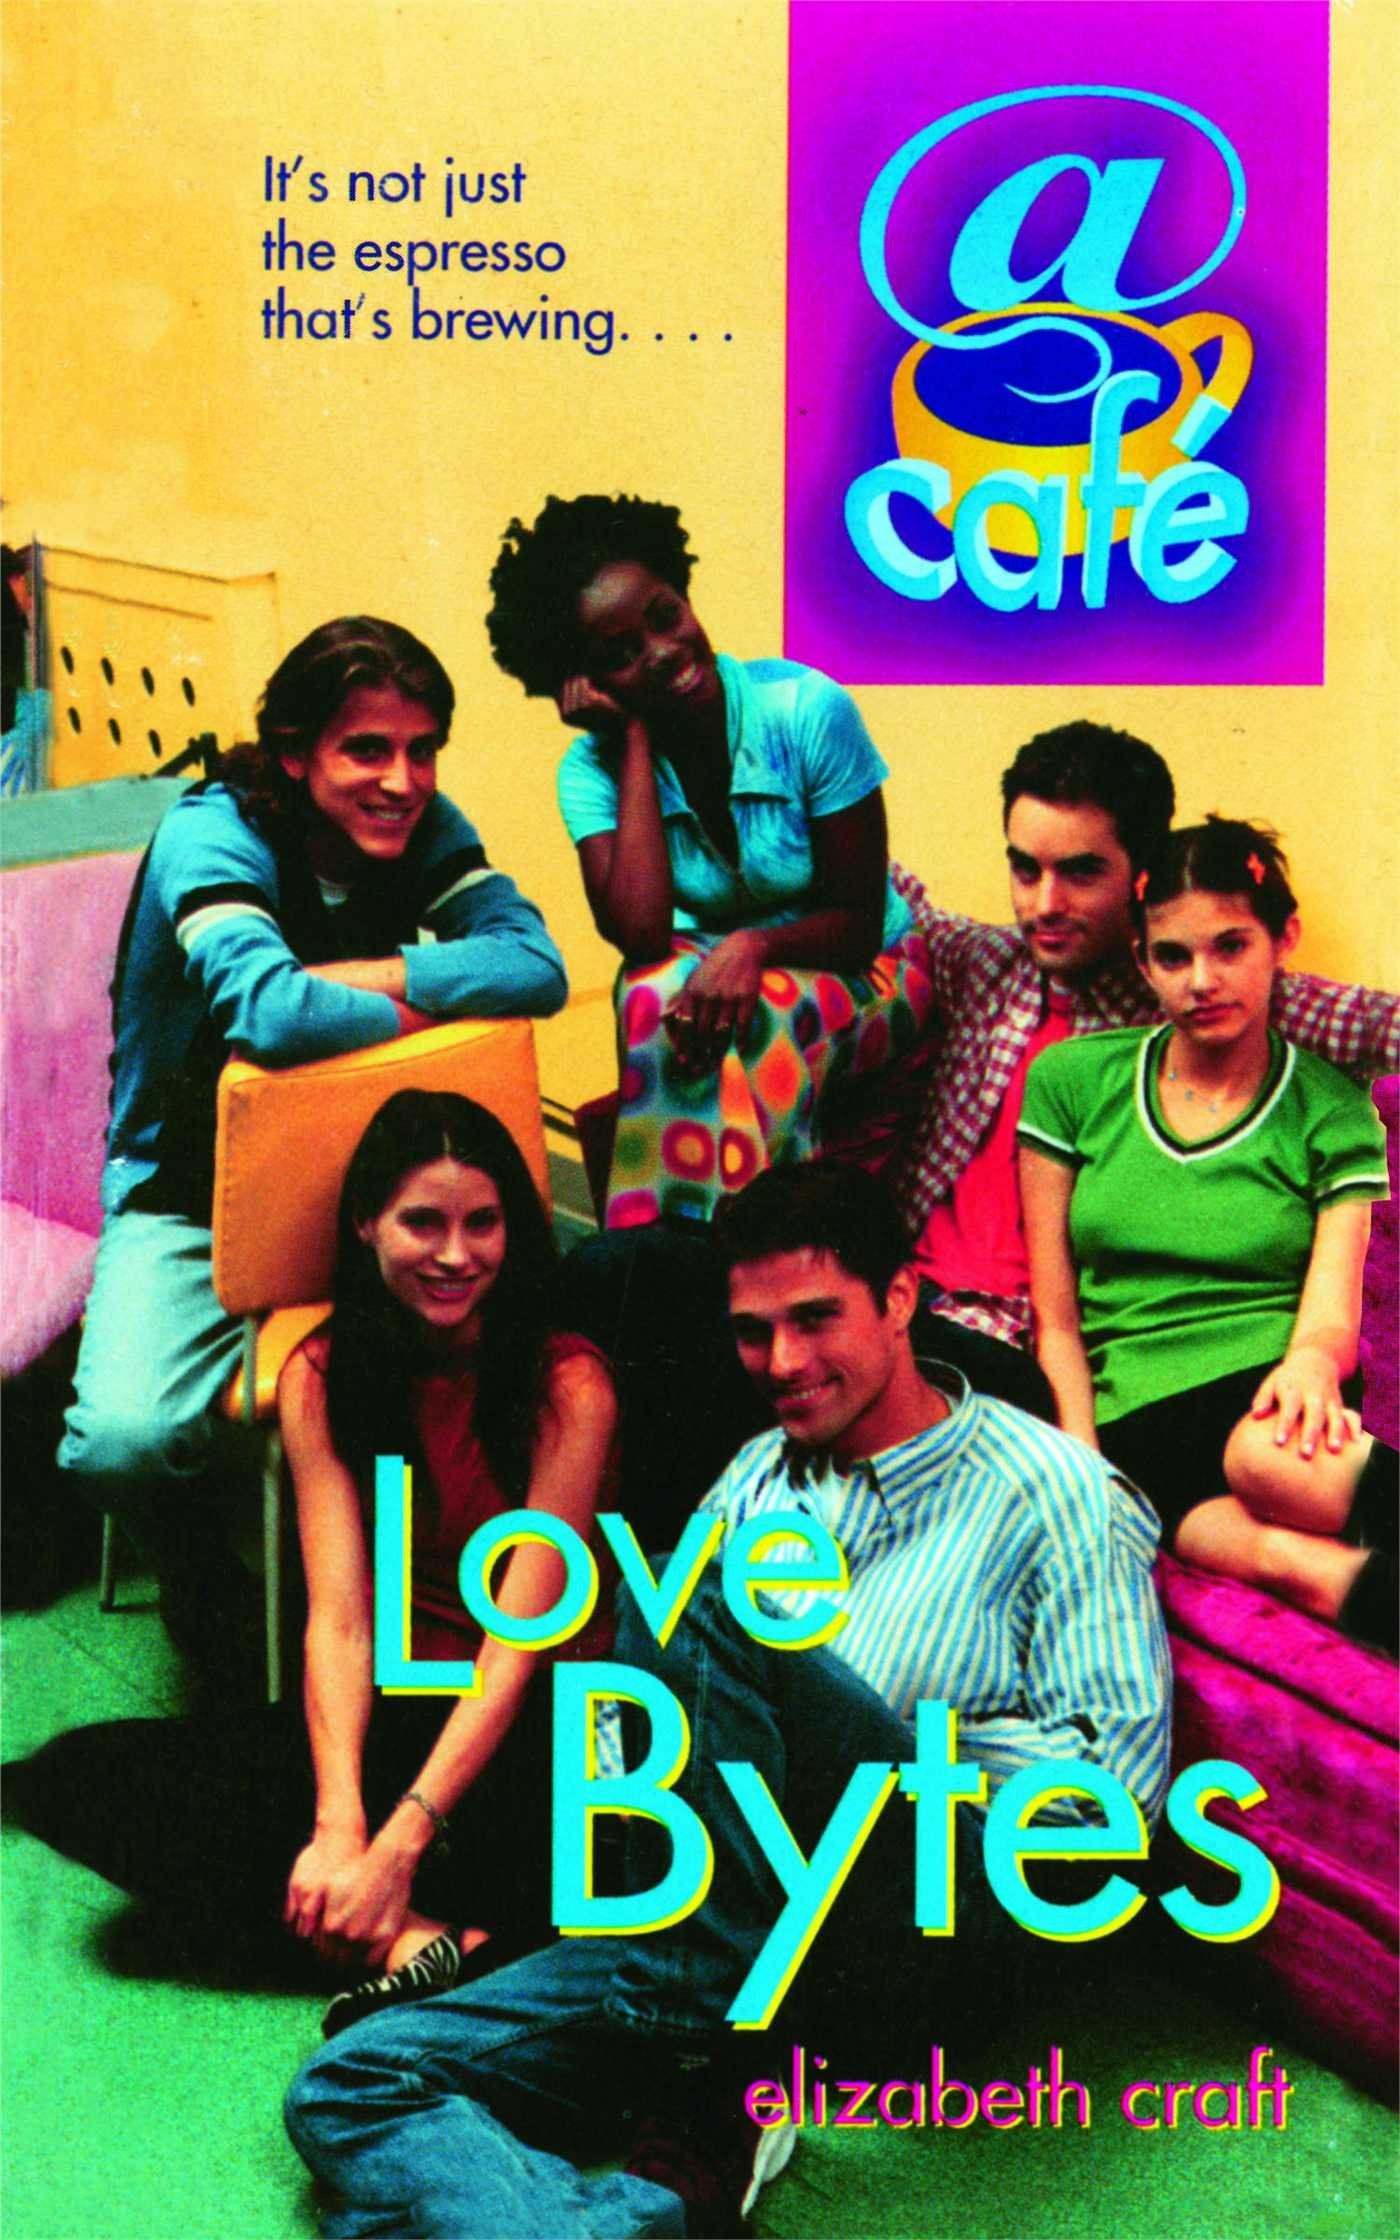 Image of the book cover for LOVE BYTES, featuring a group of teens sitting in a cafe